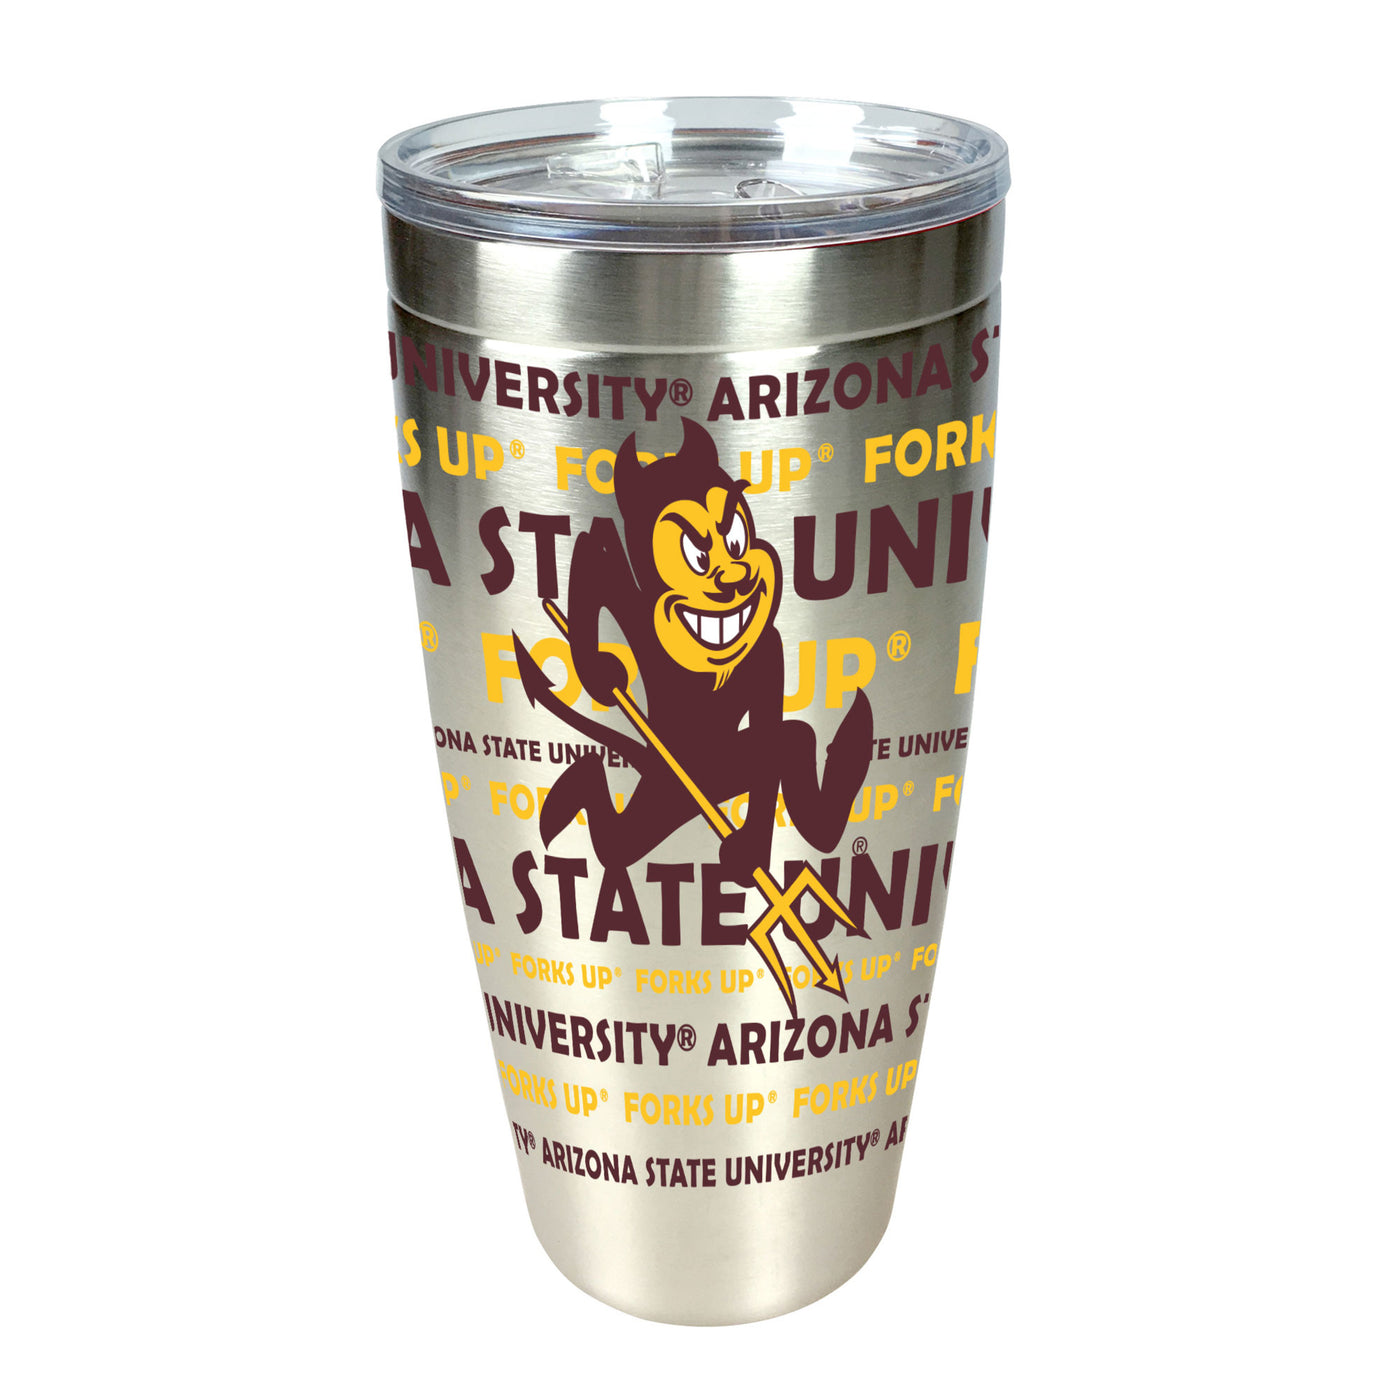 ASU 30 ounce Sliver tumbler with clear lid. Features University of Arizona State and Forks Ups text repeatedly. Includes Sparky logo front and center. 